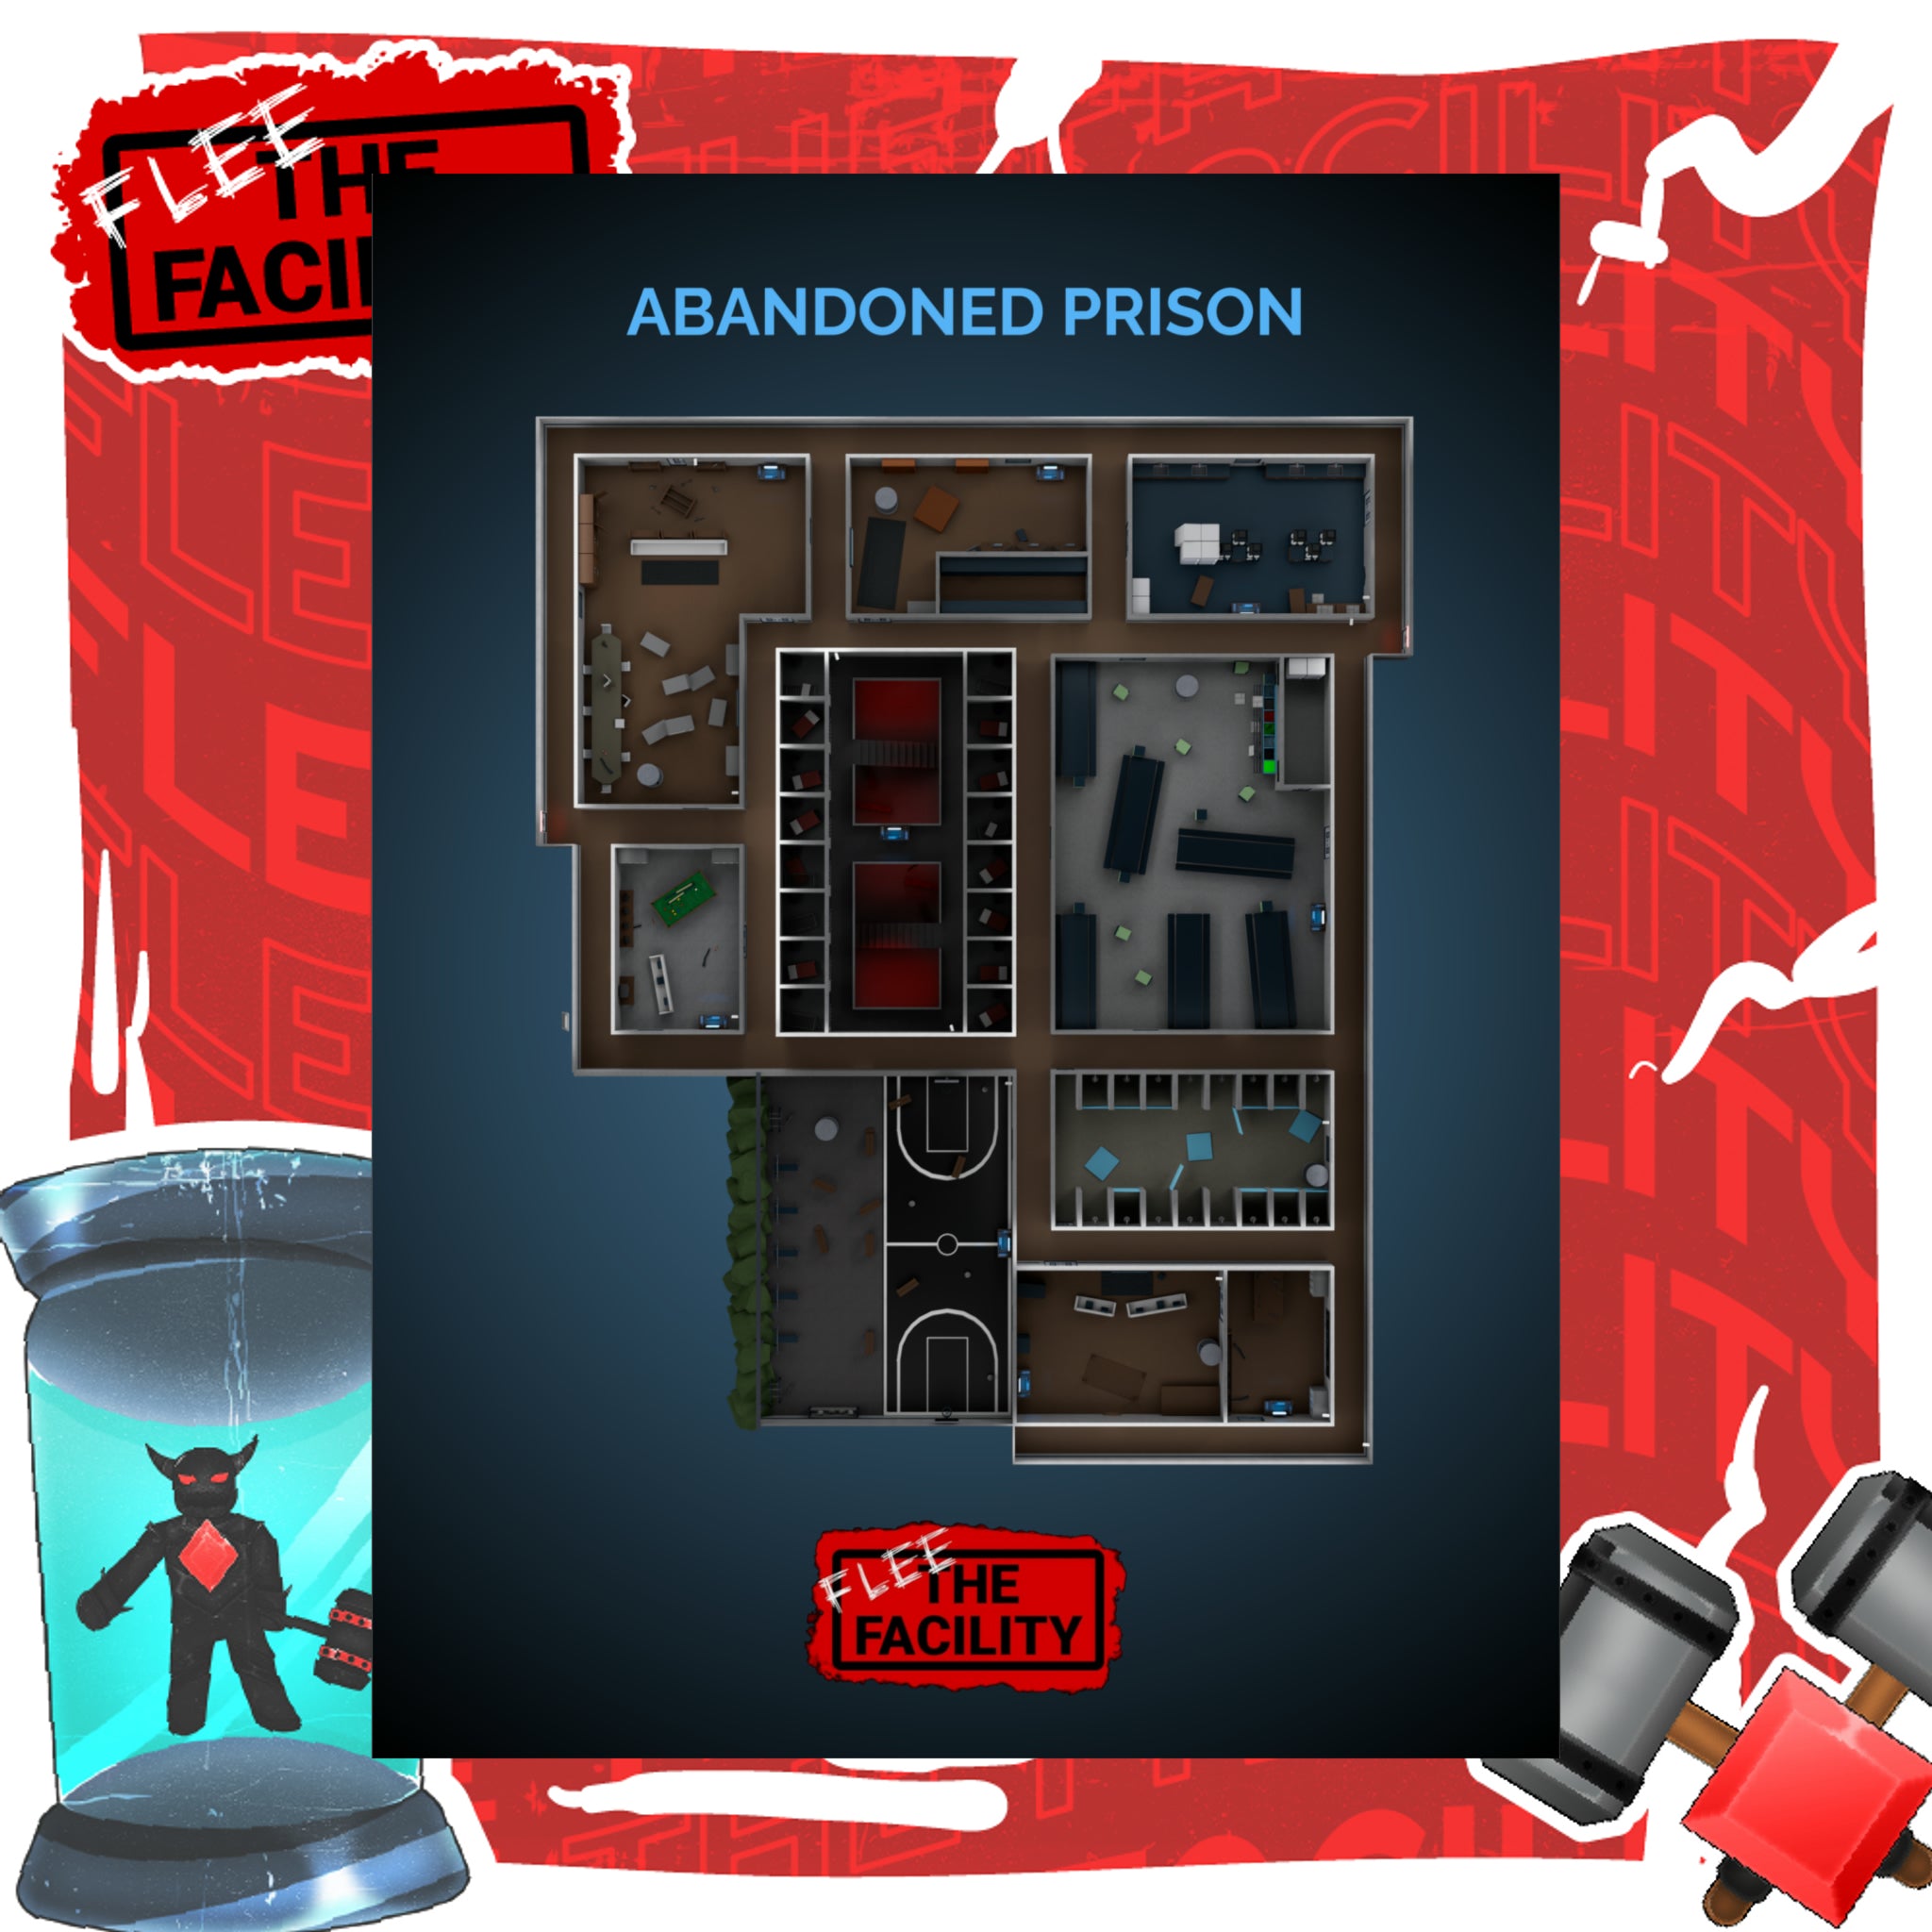 Flee The Facility - Abandoned Prison Poster